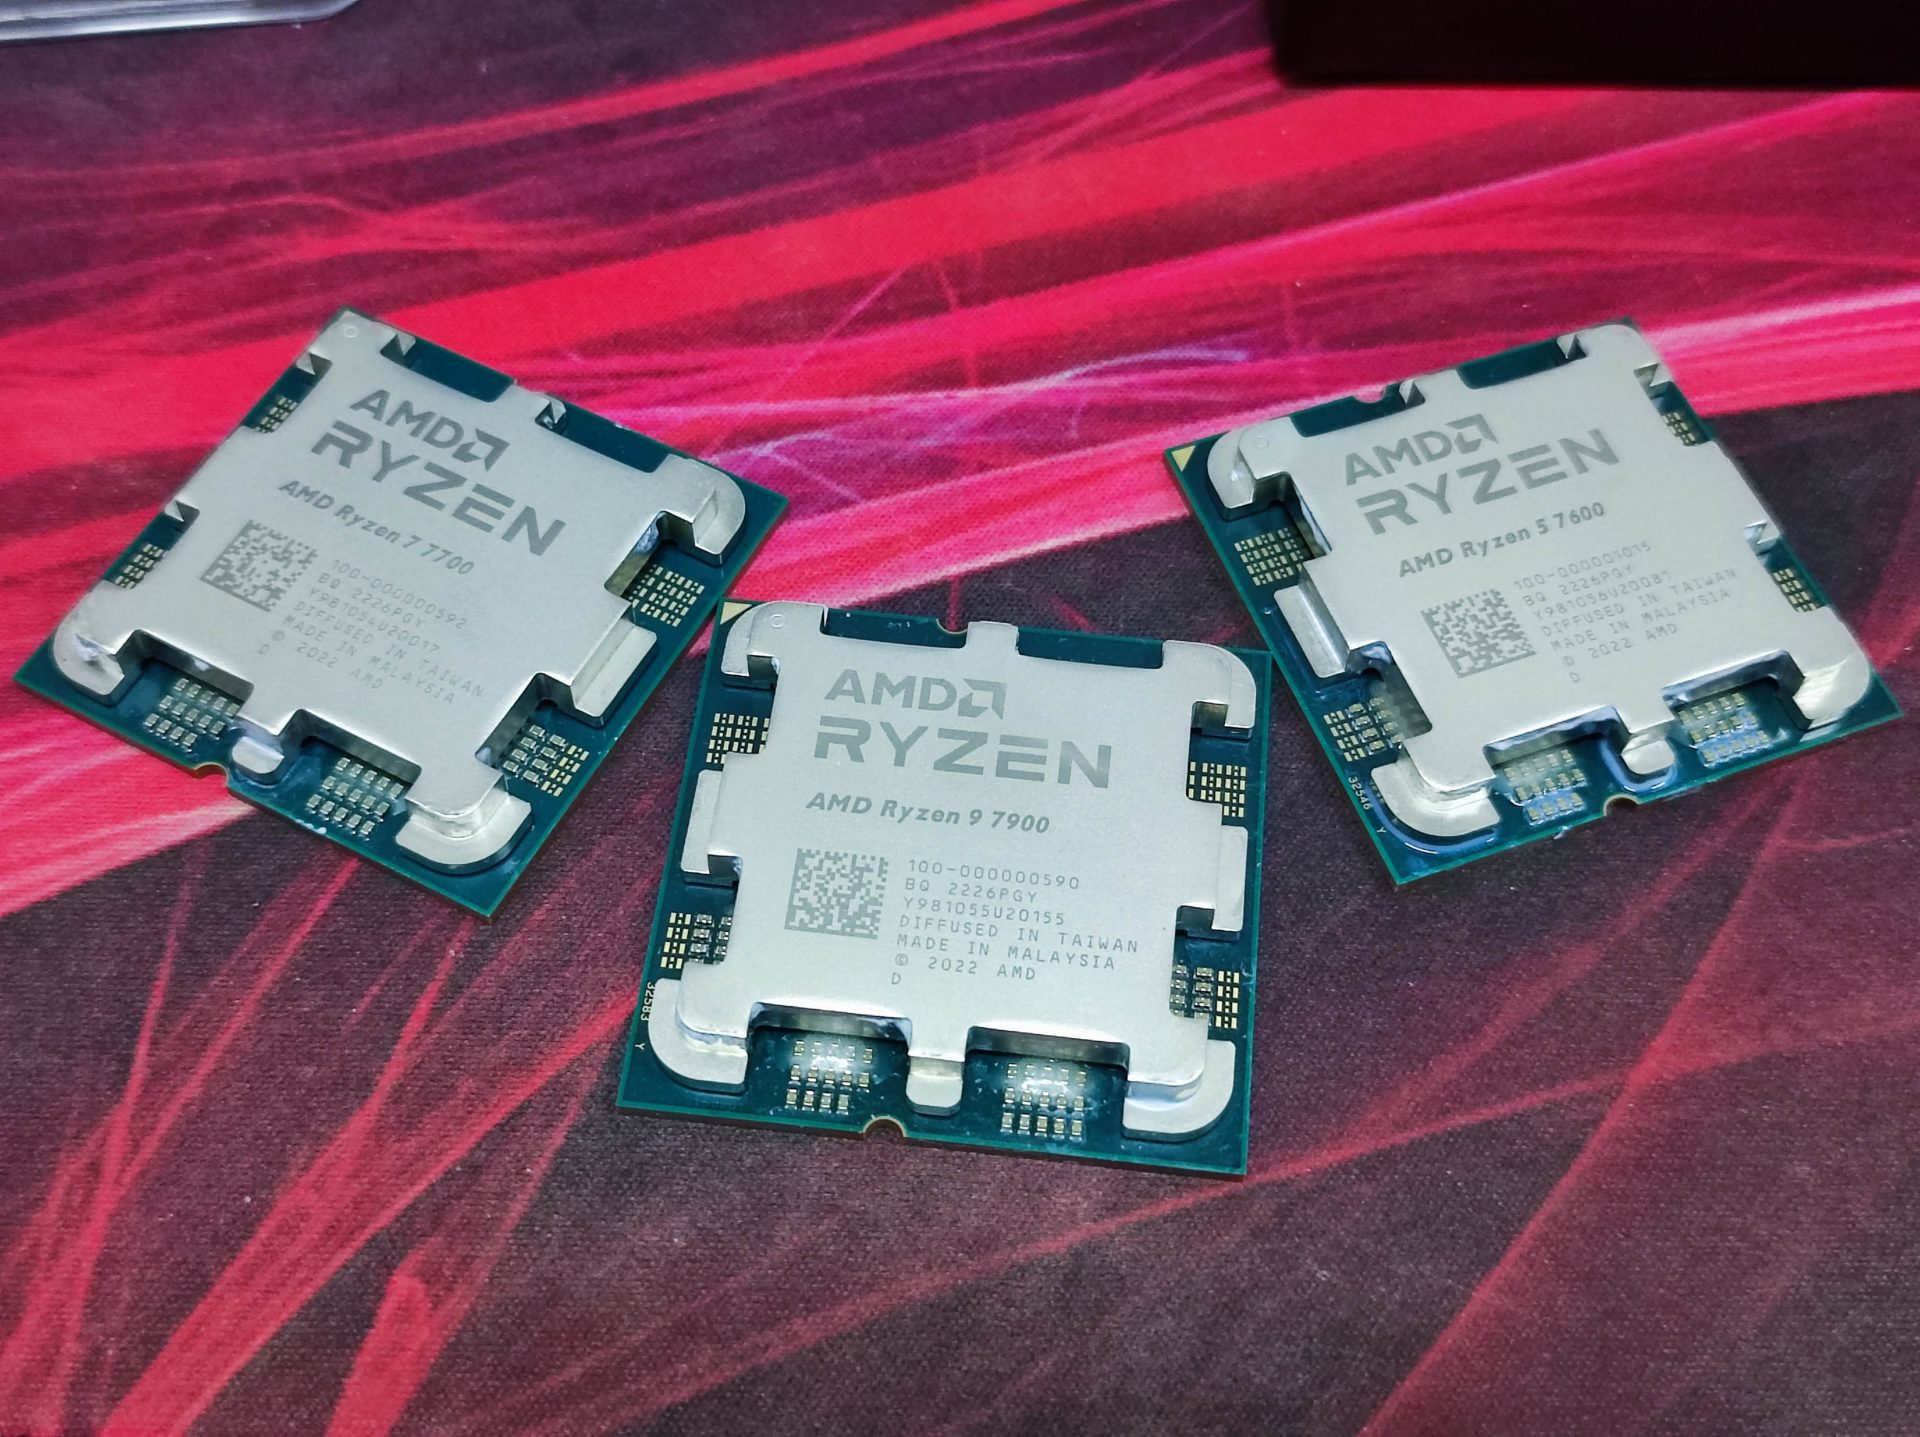 AMD Ryzen 5 7600 Review - Affordable Zen 4 for the Masses